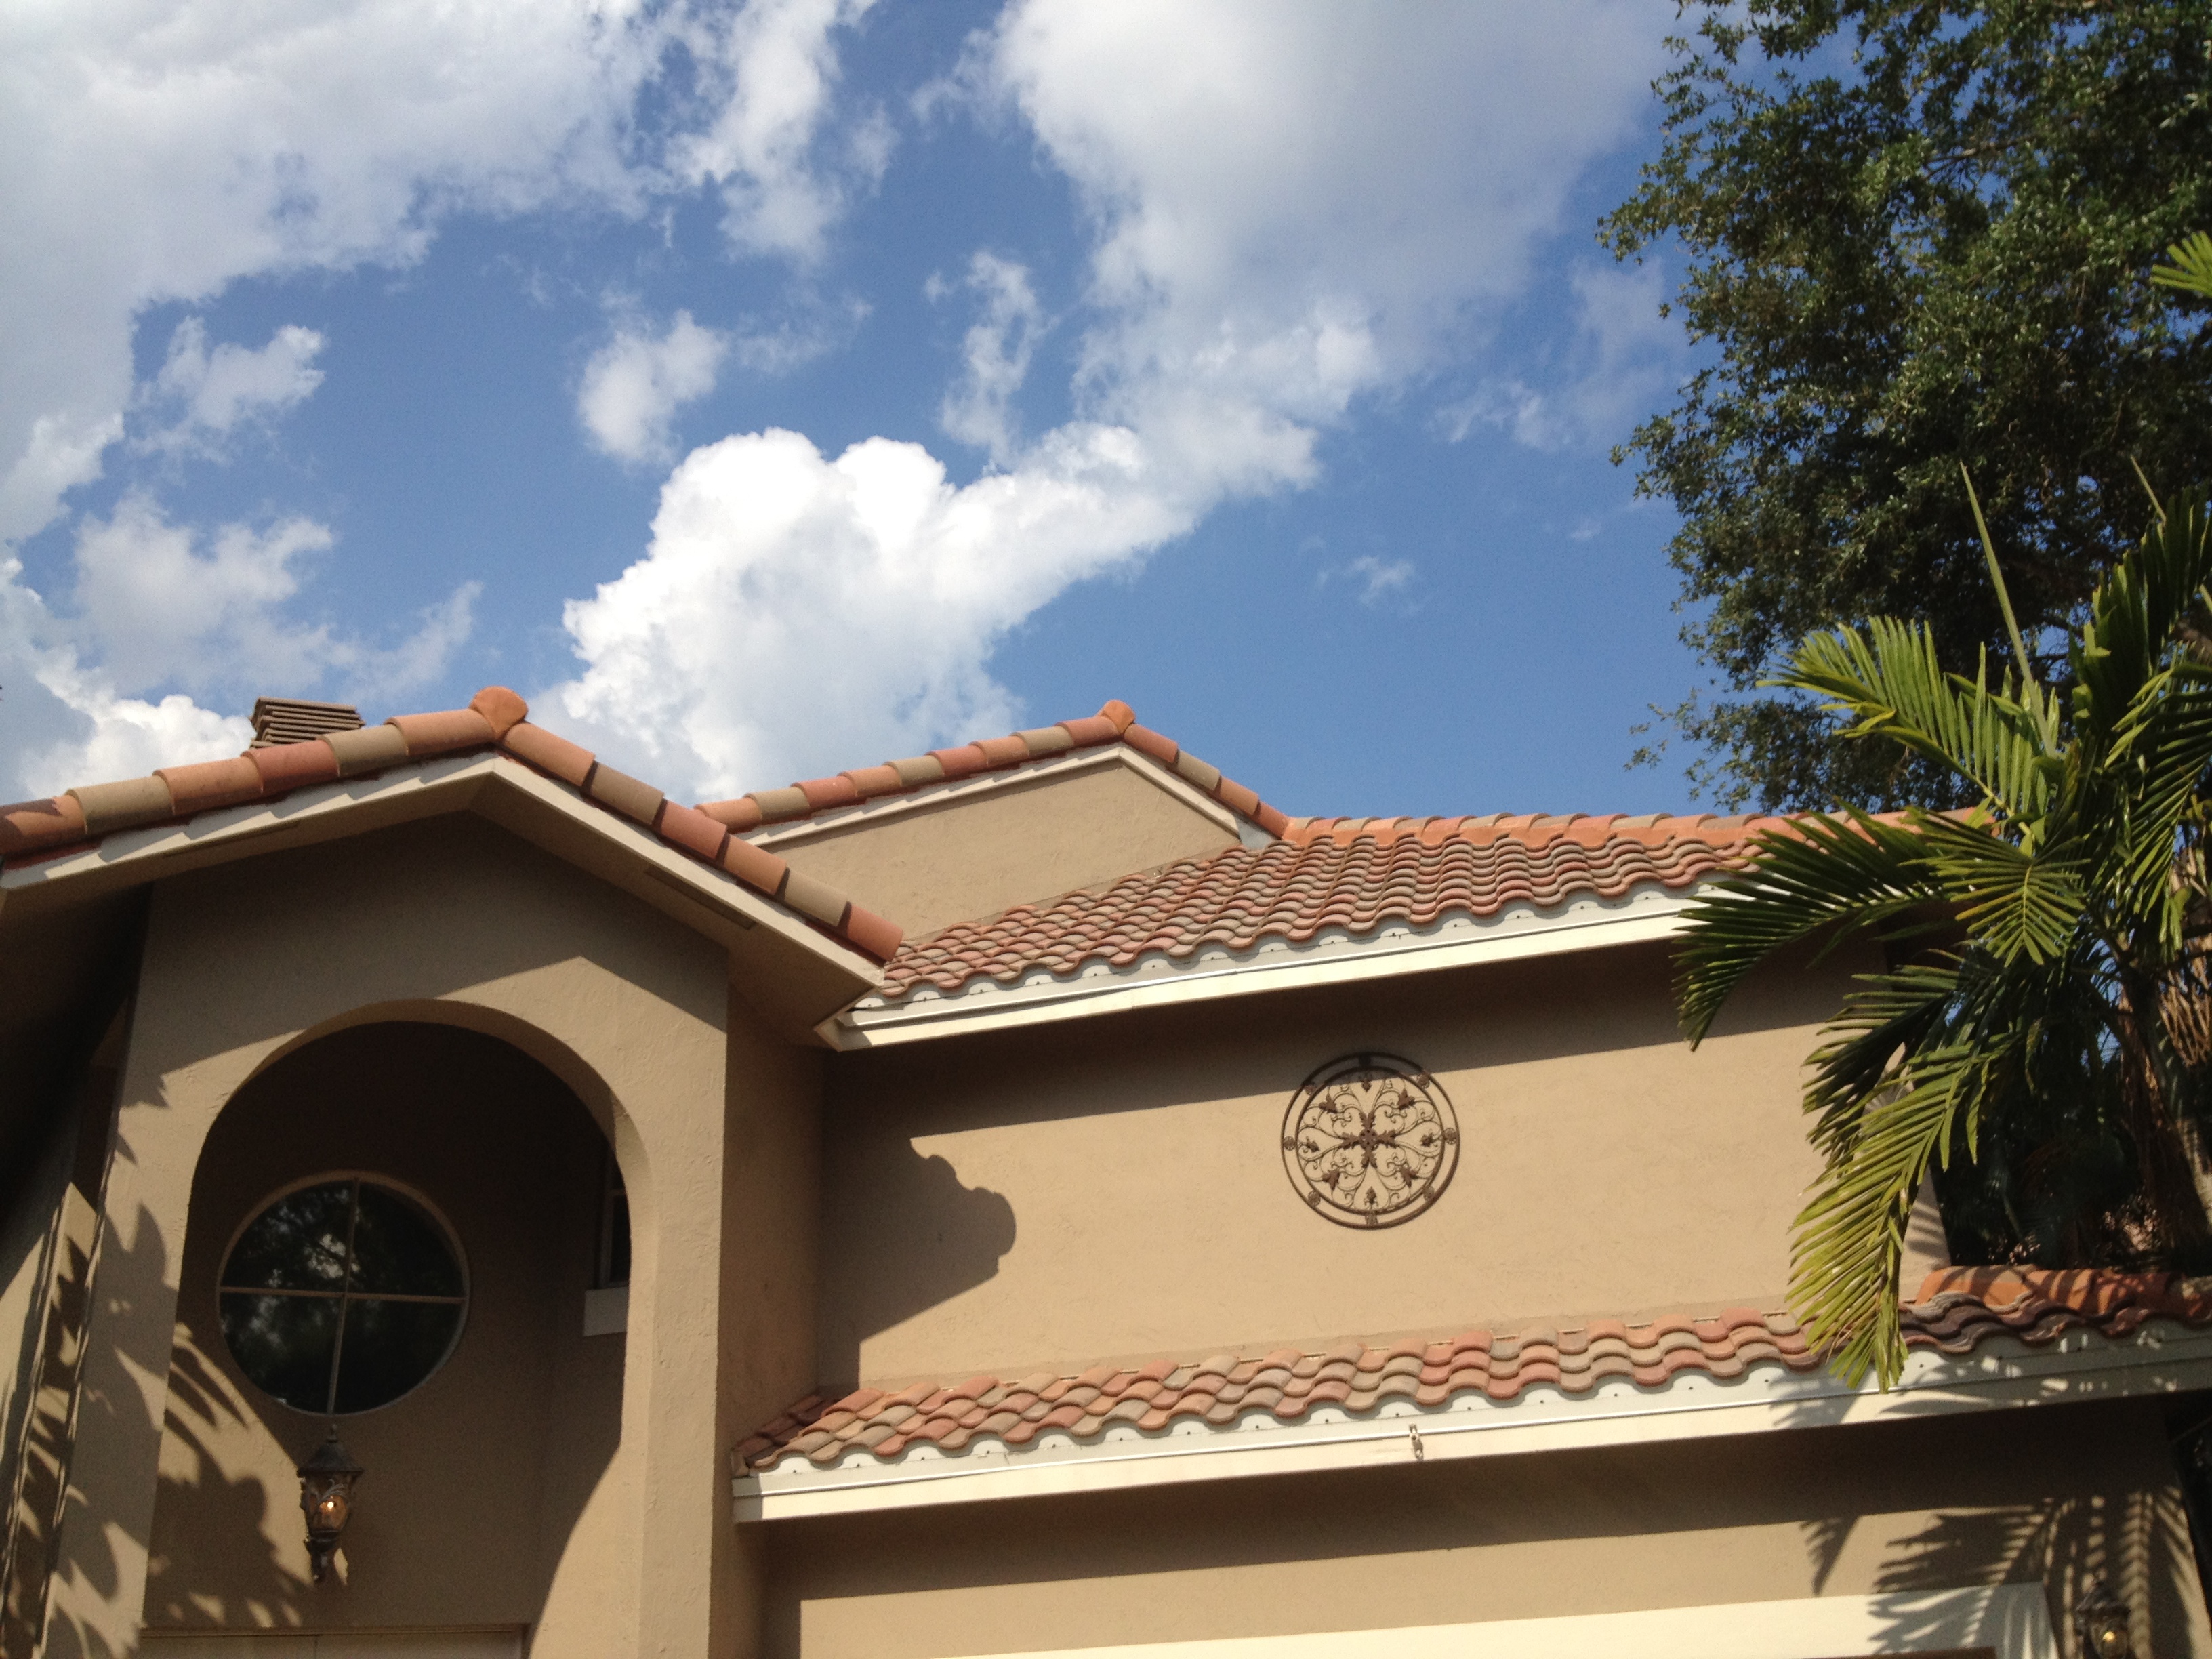 ABA Customs, Inc. Tile Roof Project in Parkland, Florida